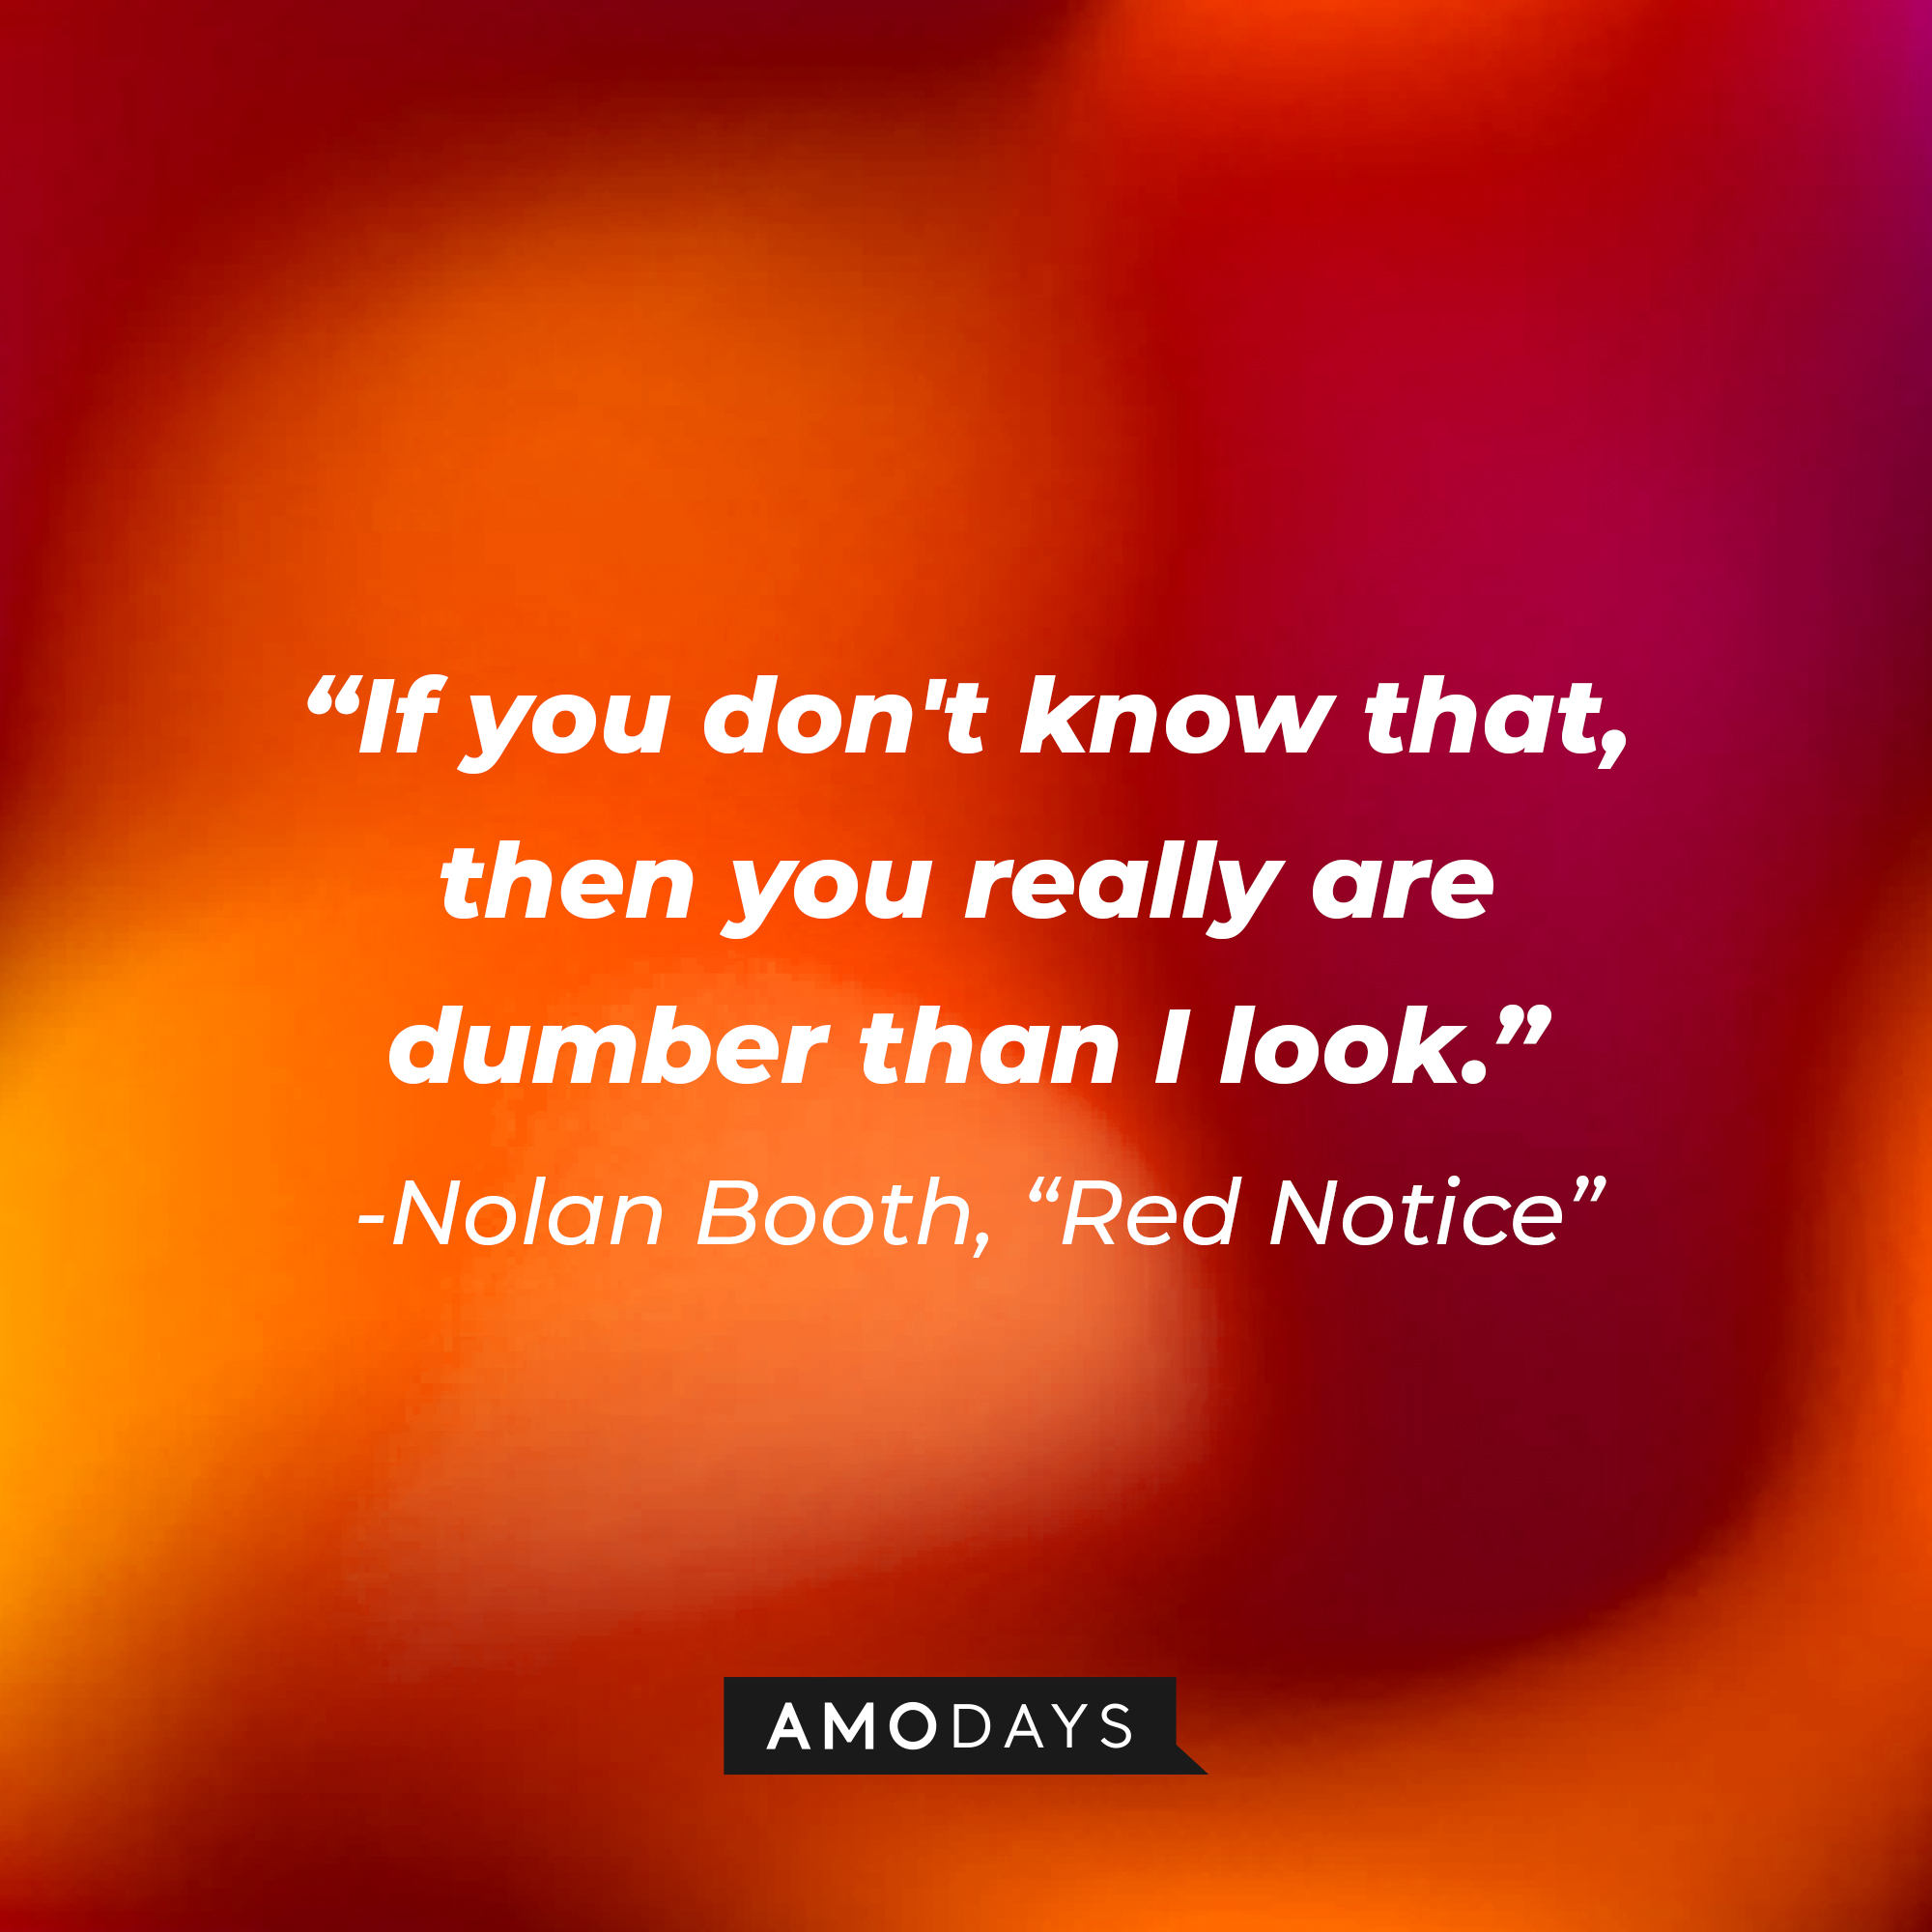 Nolan Booth's quote from "Red Notice:" “If you don't know that, then you really are dumber than I look." | Source: AmoDays